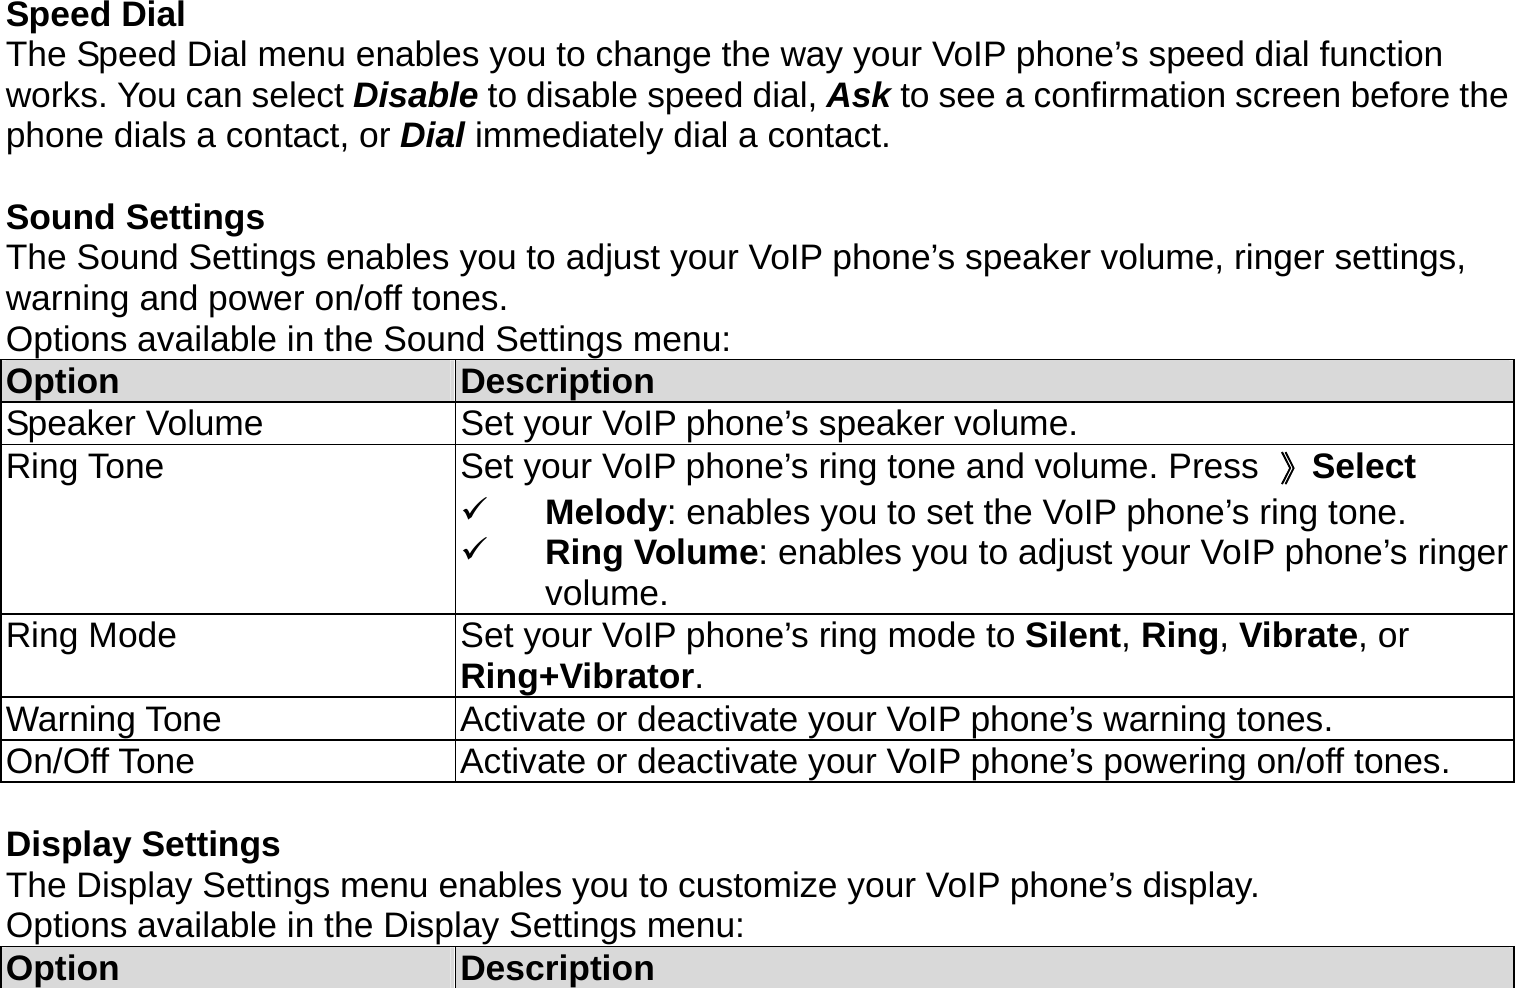 Speed Dial The Speed Dial menu enables you to change the way your VoIP phone’s speed dial function works. You can select Disable to disable speed dial, Ask to see a confirmation screen before the phone dials a contact, or Dial immediately dial a contact.    Sound Settings The Sound Settings enables you to adjust your VoIP phone’s speaker volume, ringer settings, warning and power on/off tones. Options available in the Sound Settings menu: Option  Description Speaker Volume  Set your VoIP phone’s speaker volume. Ring Tone  Set your VoIP phone’s ring tone and volume. Press  》Select   Melody: enables you to set the VoIP phone’s ring tone.   Ring Volume: enables you to adjust your VoIP phone’s ringer volume. Ring Mode  Set your VoIP phone’s ring mode to Silent, Ring, Vibrate, or Ring+Vibrator. Warning Tone  Activate or deactivate your VoIP phone’s warning tones. On/Off Tone  Activate or deactivate your VoIP phone’s powering on/off tones.  Display Settings The Display Settings menu enables you to customize your VoIP phone’s display. Options available in the Display Settings menu: Option  Description 